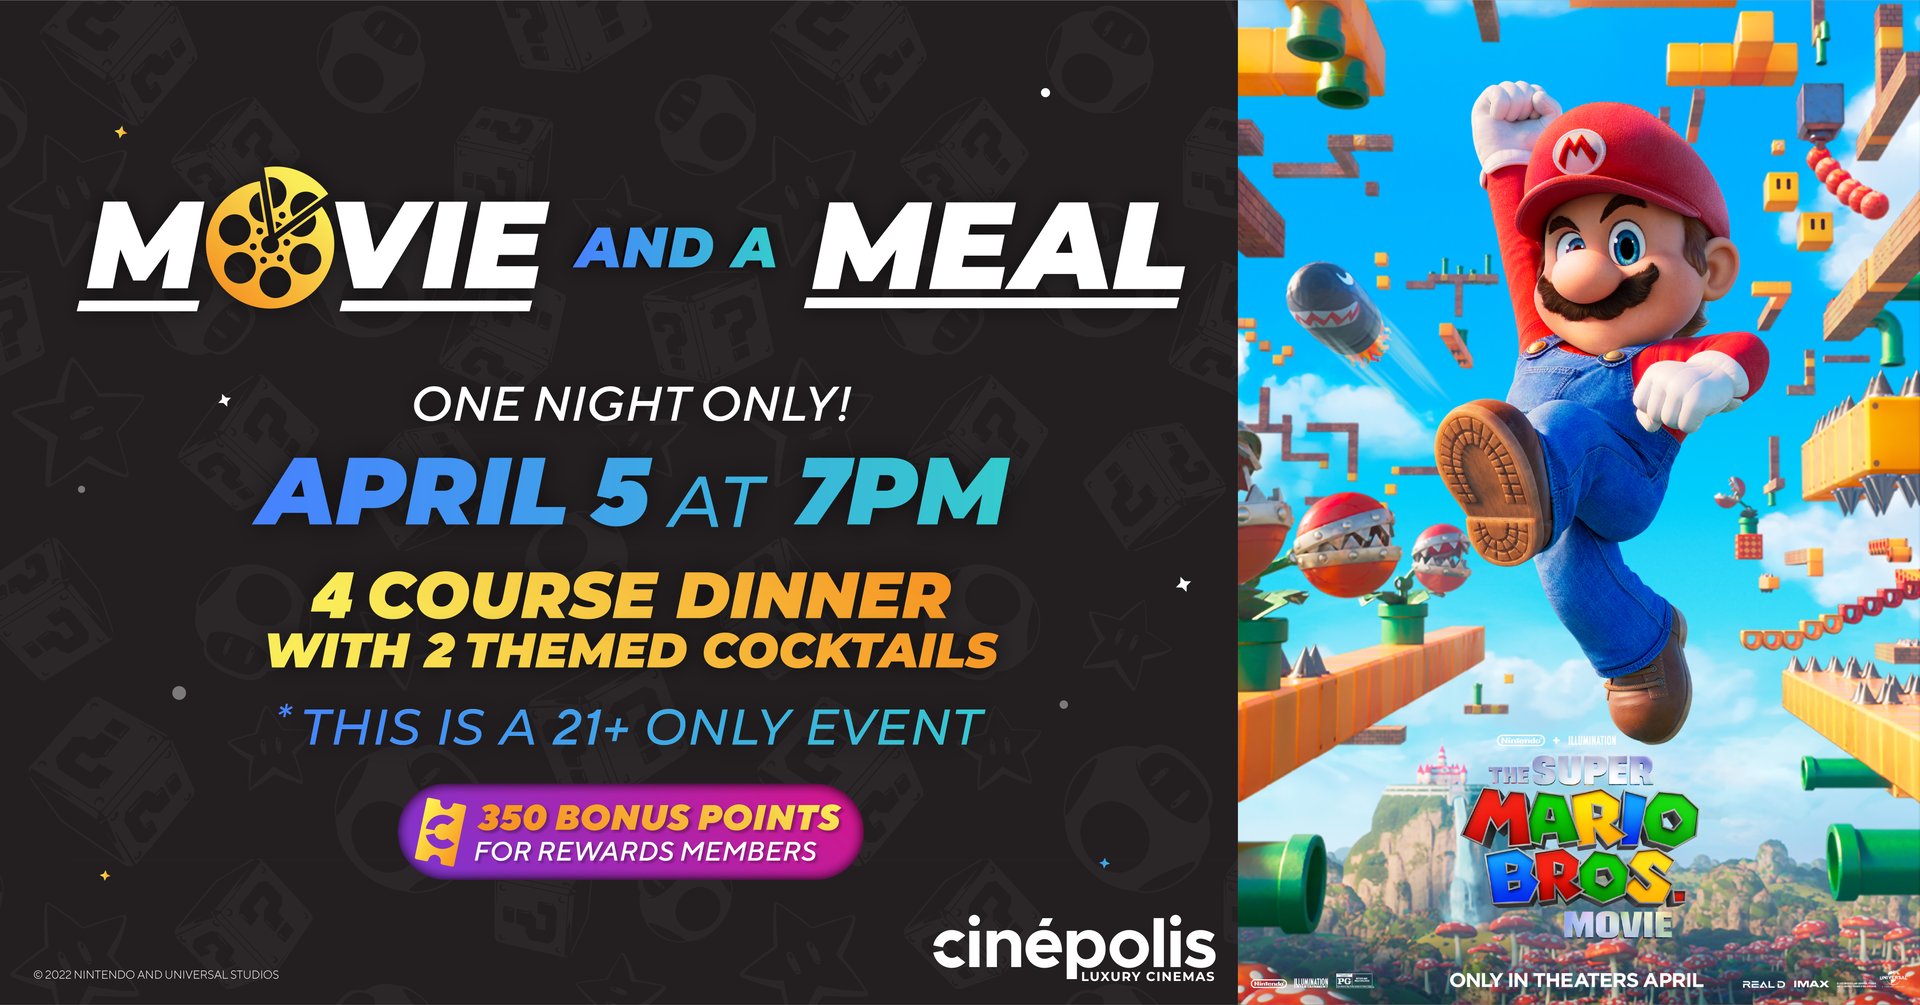 Movie and a Meal Super Mario Bros at Cinepolis and Moviehouse